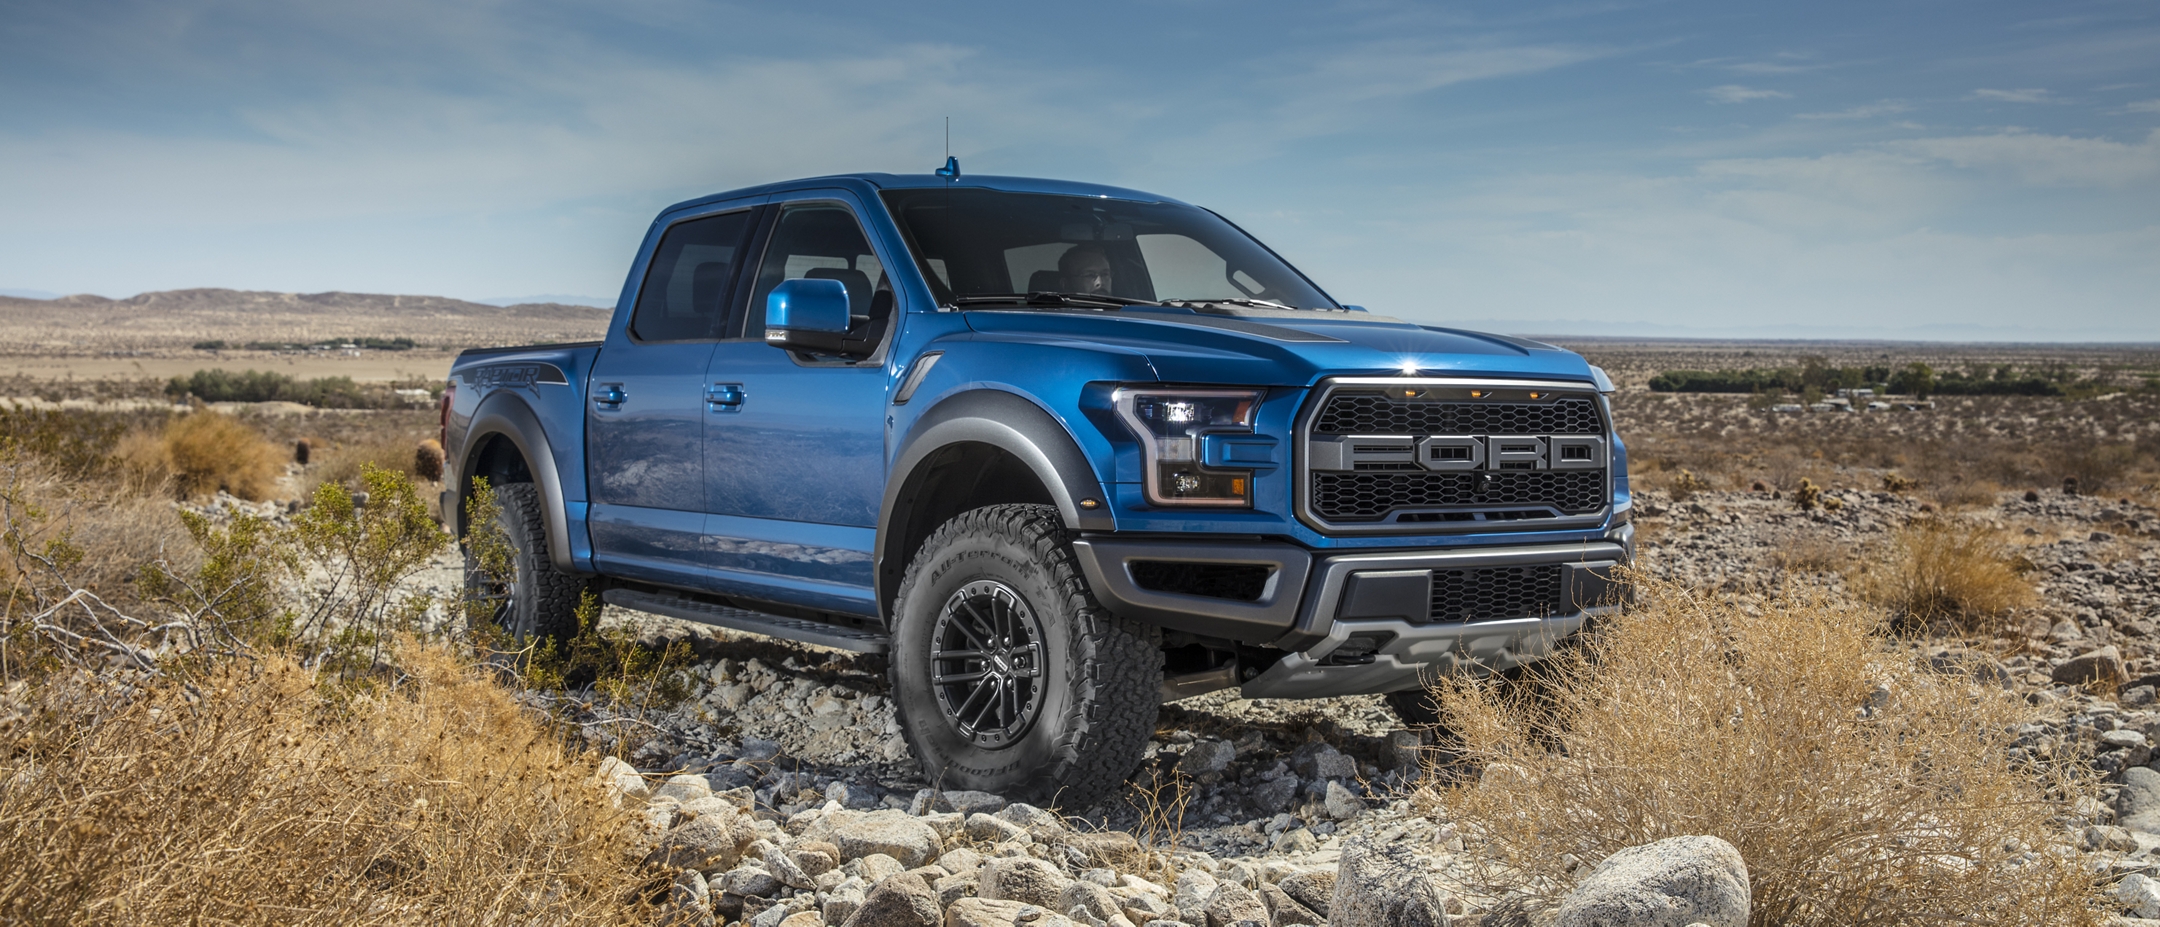 Research the 2019 Ford F-150 vs 2020 Ford F-150 near Eustis FL